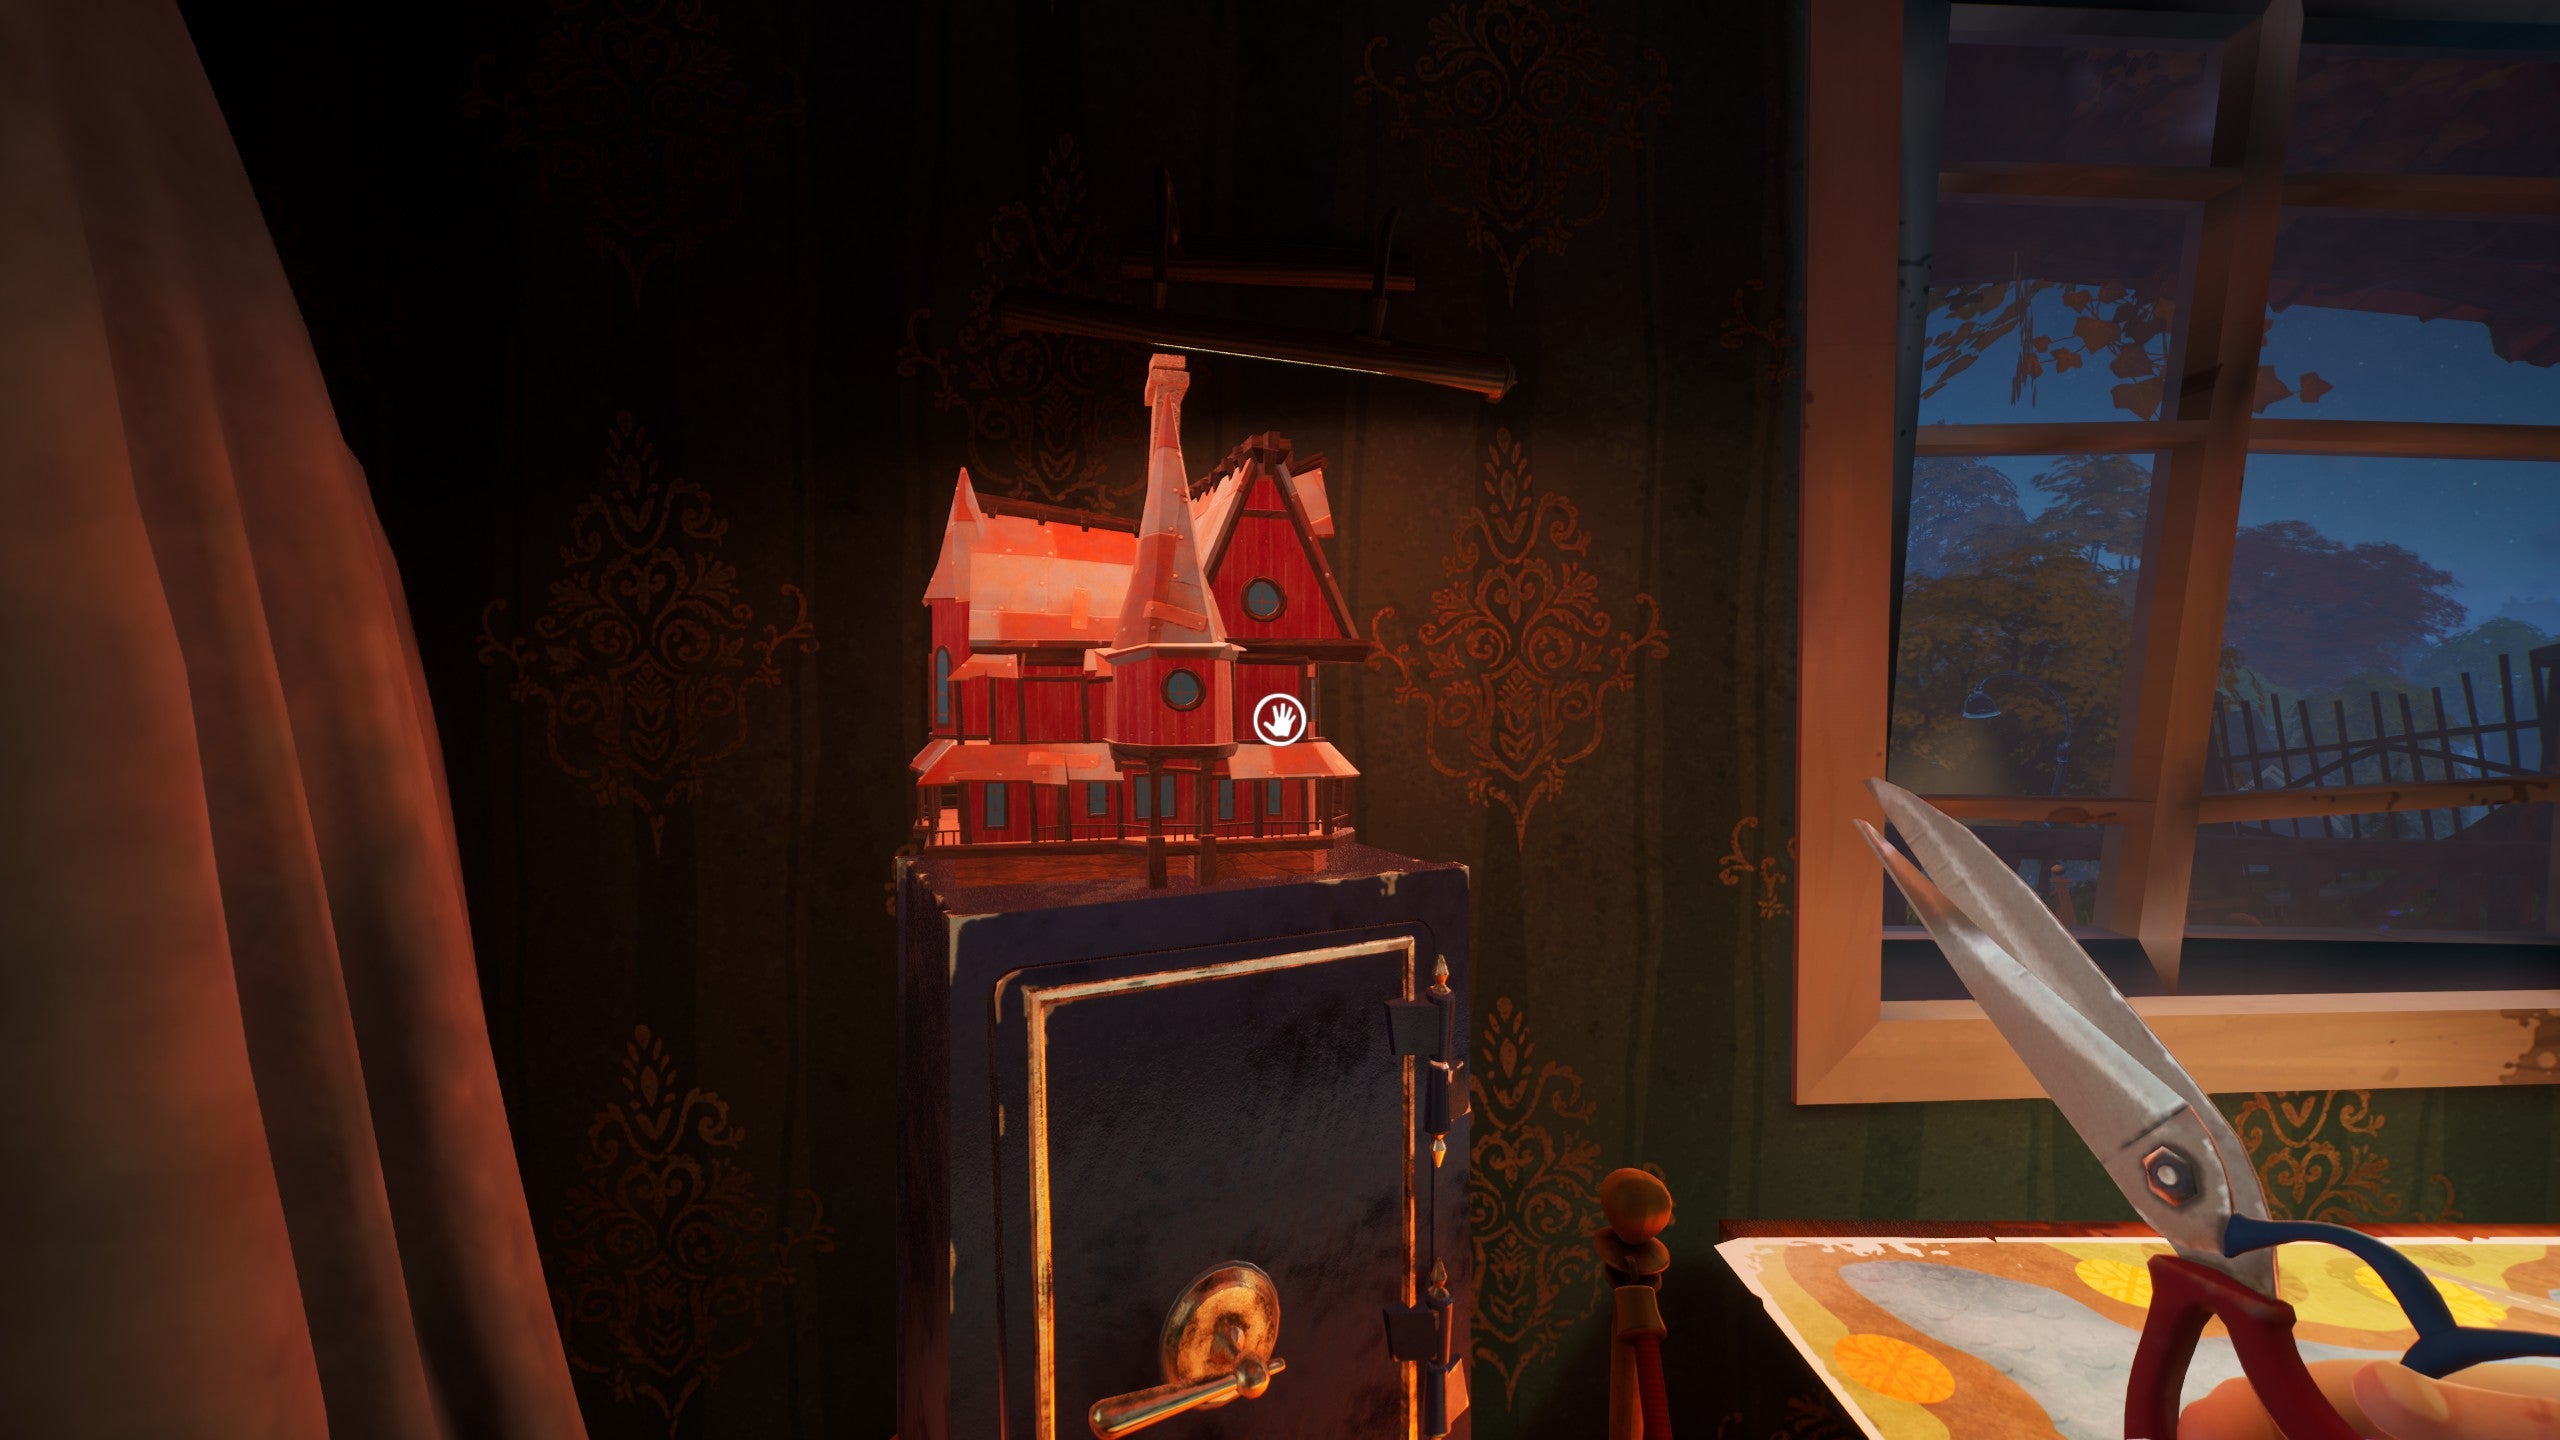 The first model house in the museum in Hello Neighbor 2